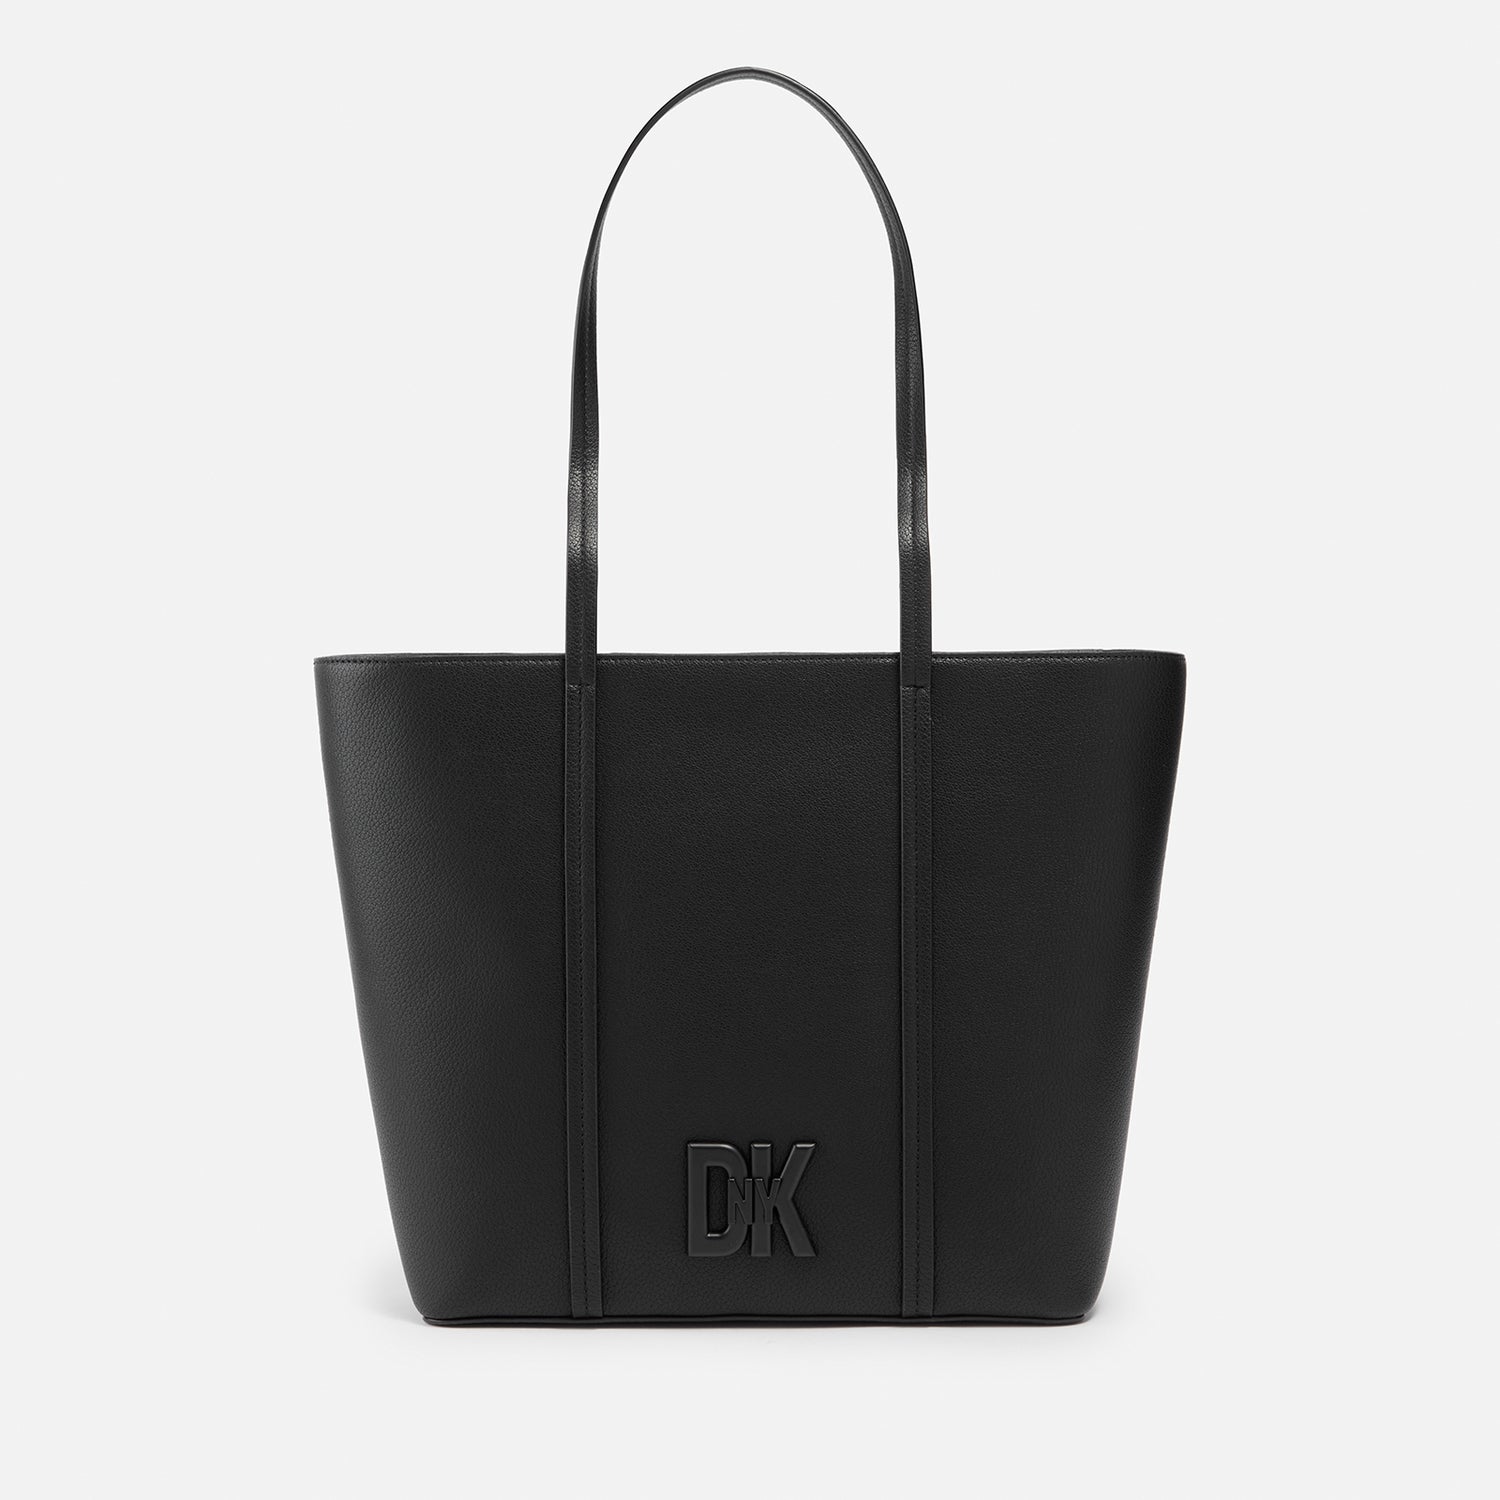 DKNY Seventh Avenue Leather Tote Bag